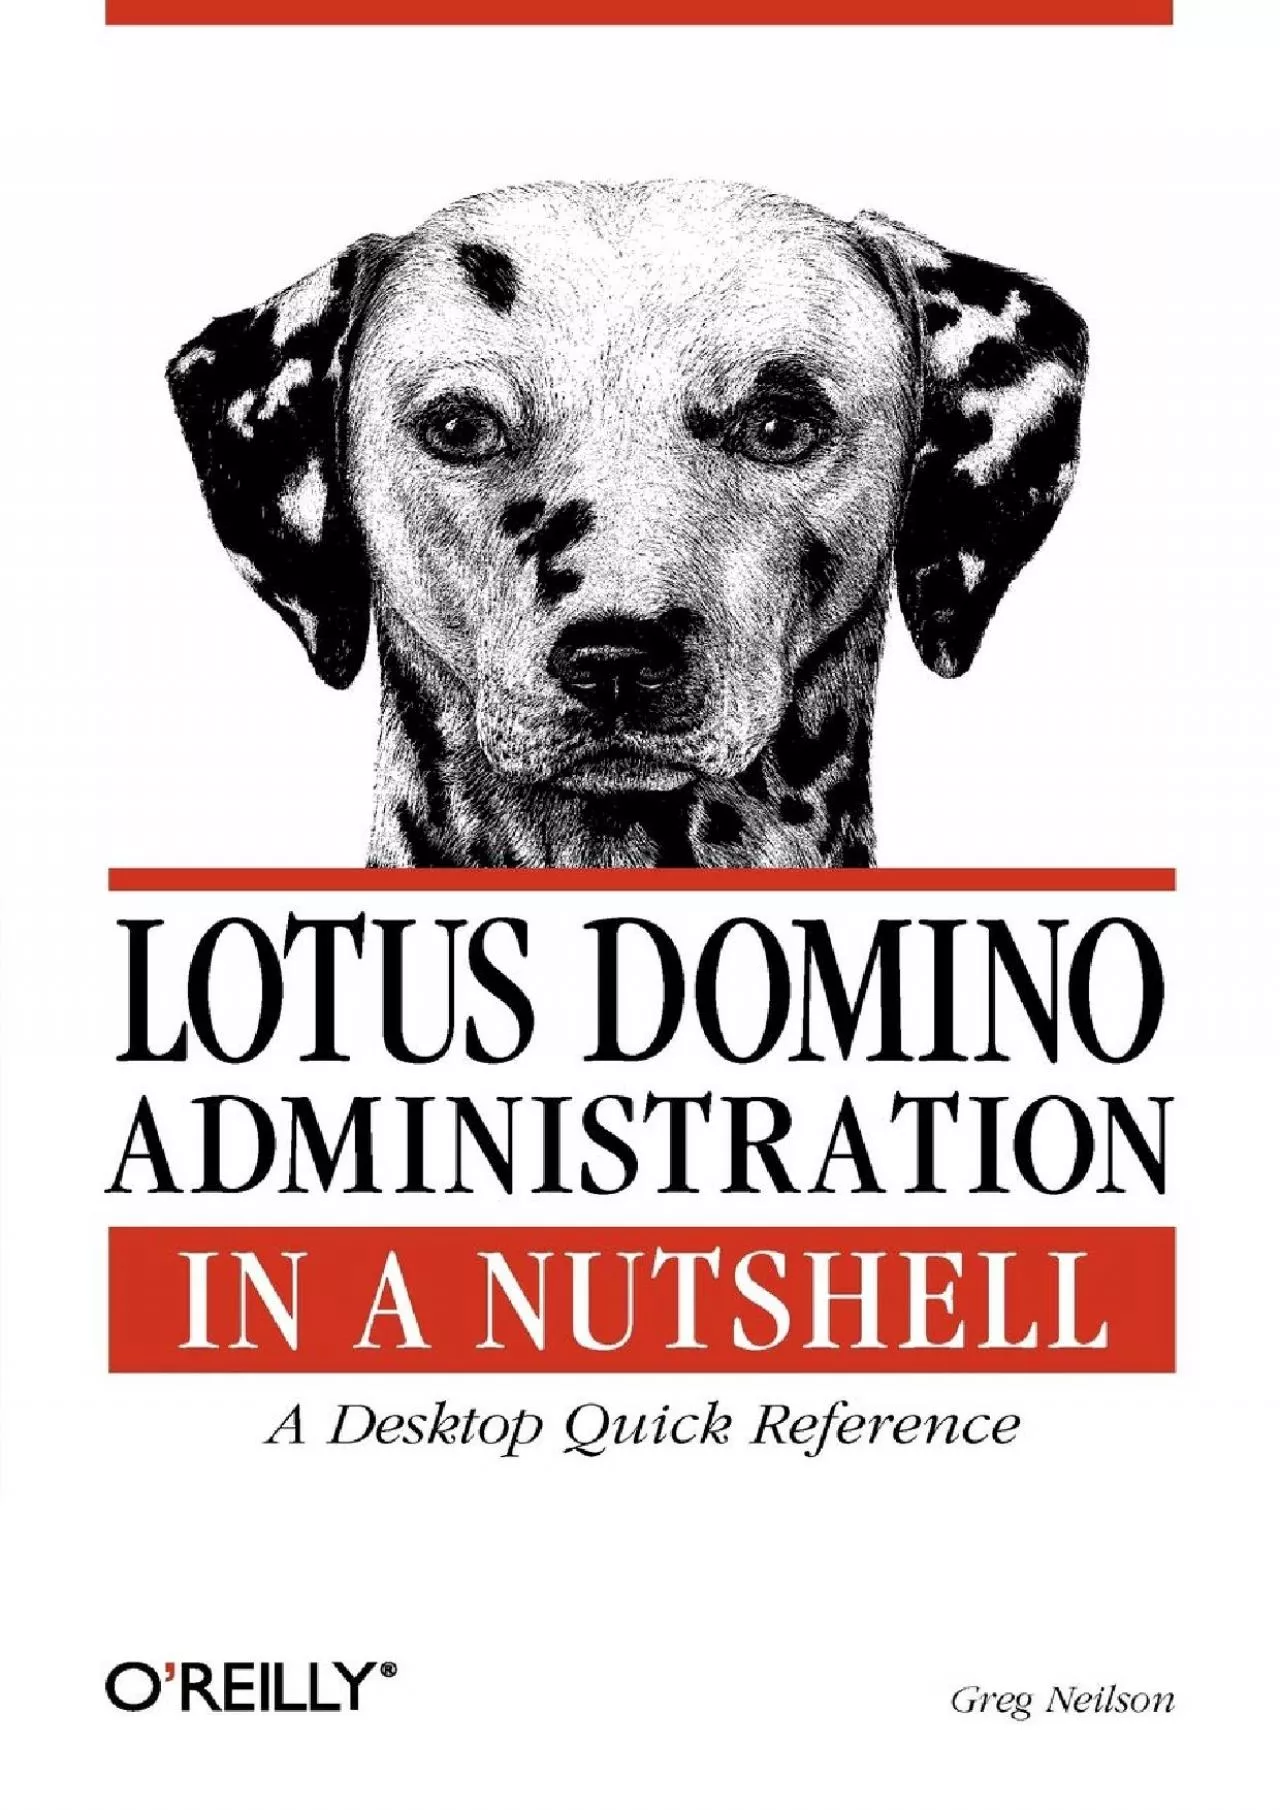 (EBOOK)-Lotus Domino Administration in a Nutshell: A Desktop Quick Reference (In a Nutshell